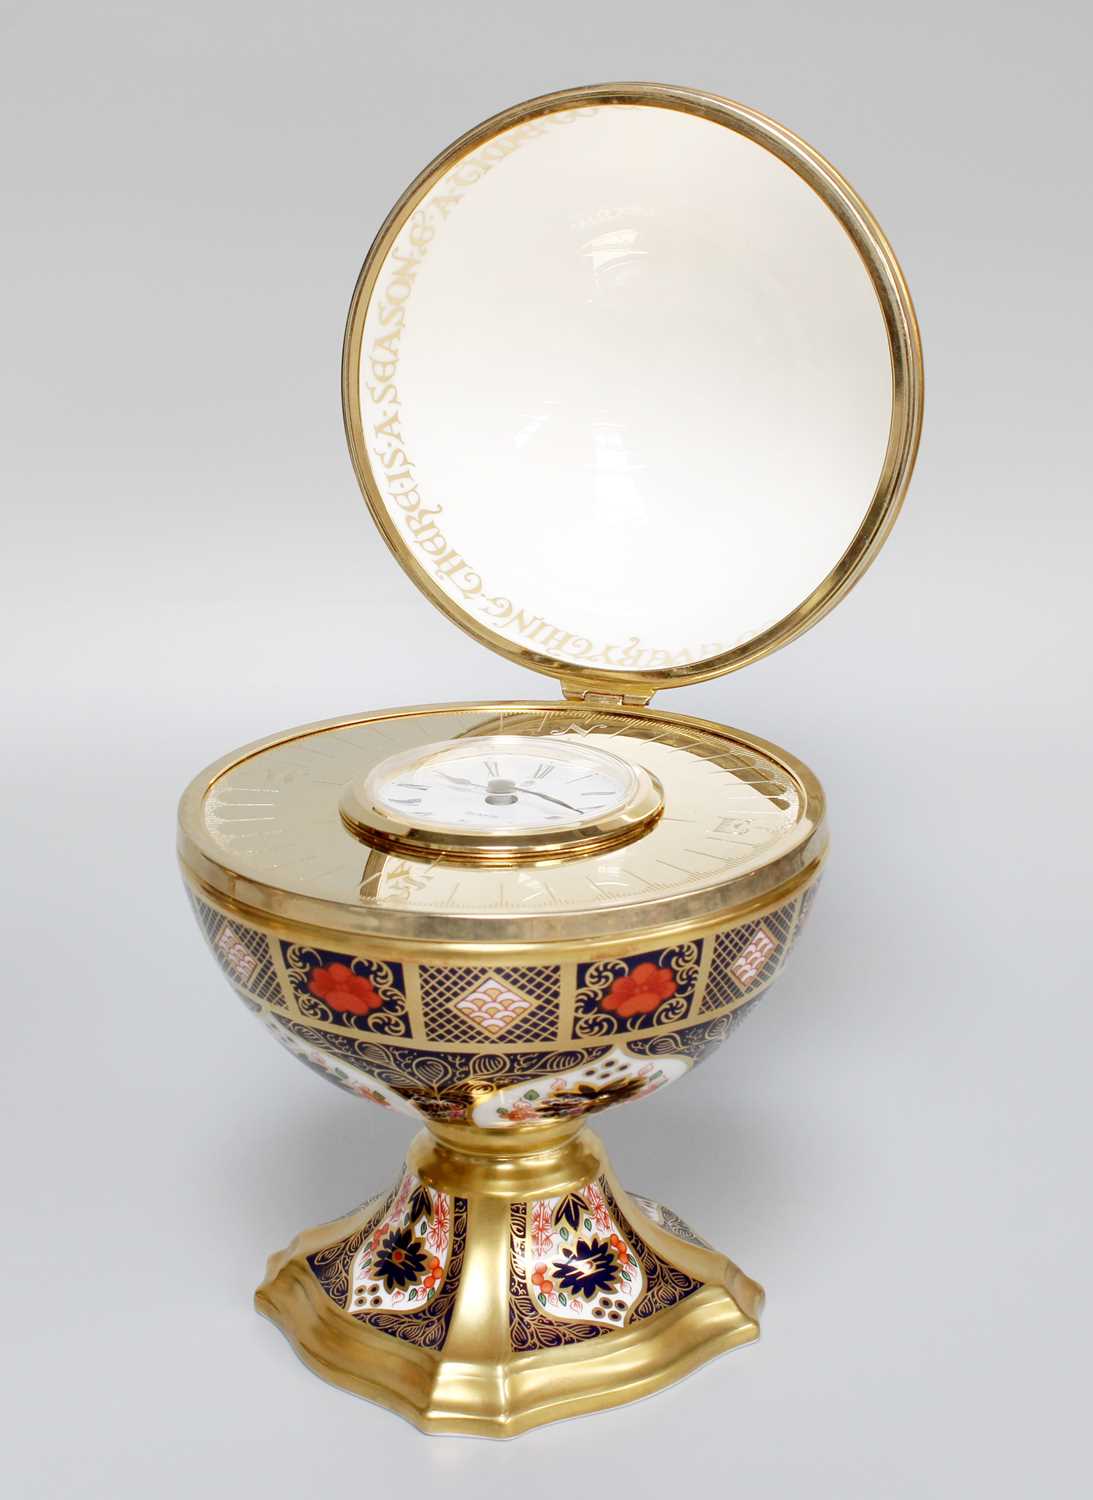 A Royal Crown Derby Imari Millennium Globe Clock, limited edition for Sinclairs 696/1000, with